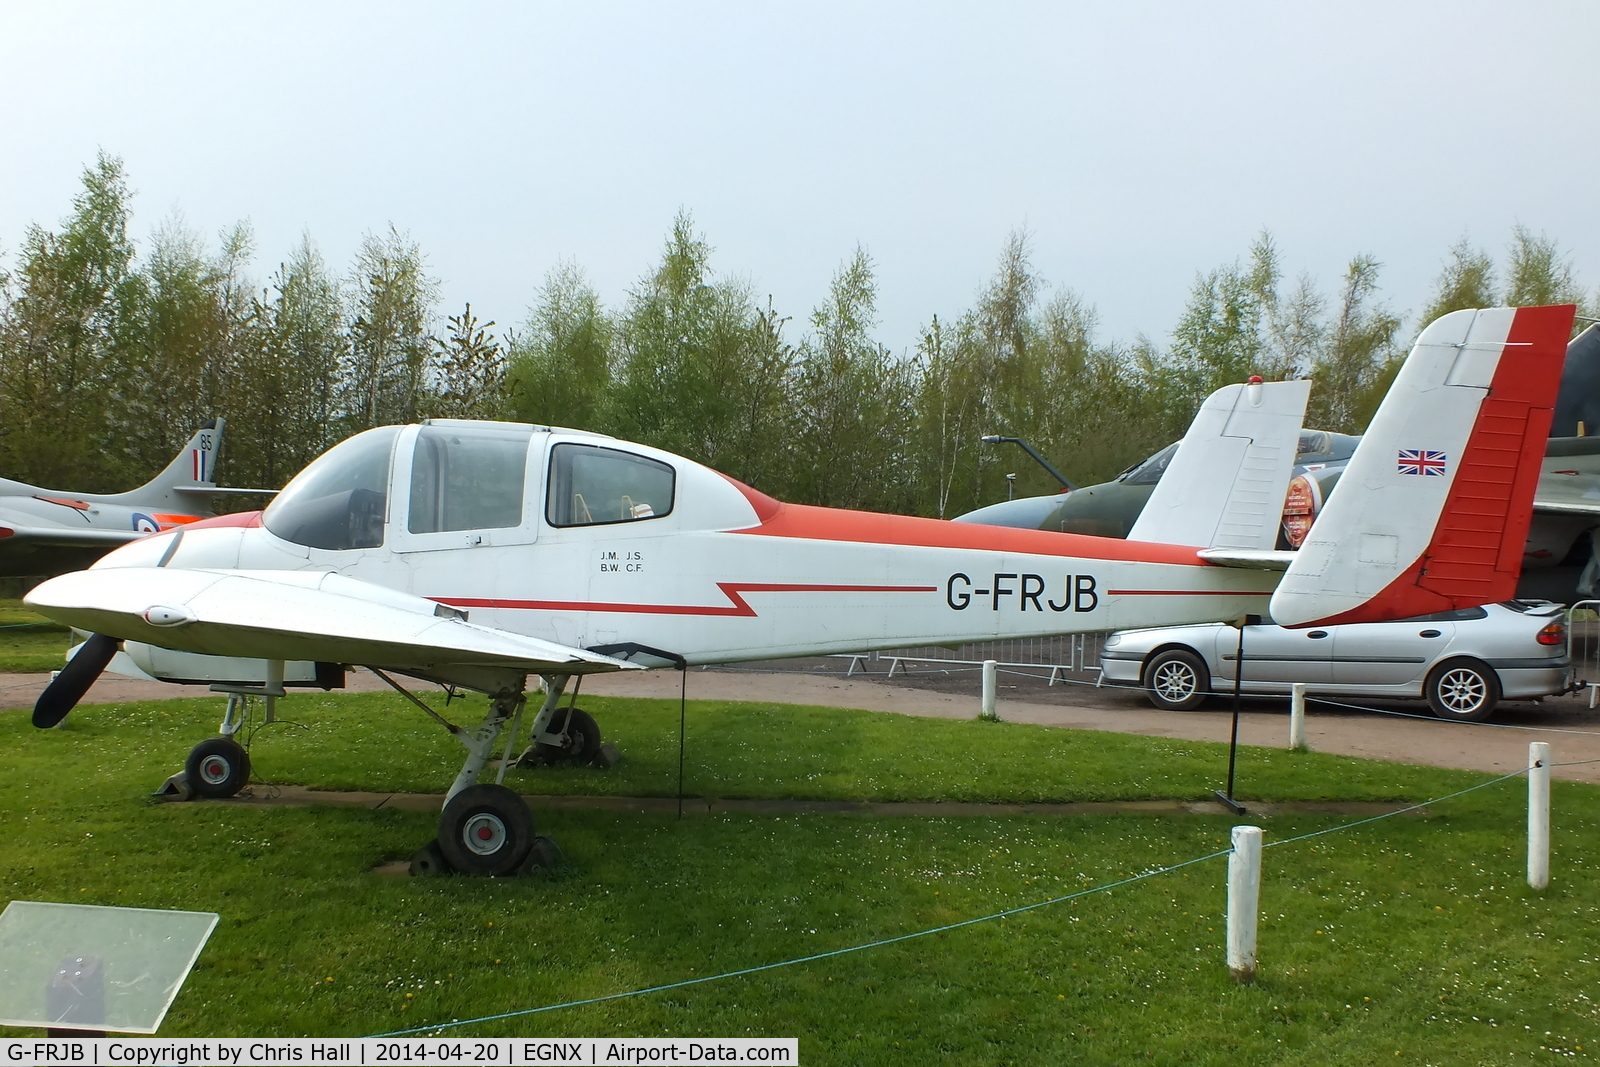 G-FRJB, 1976 Britten Sheriff SA.1 C/N 0001, Preserved at the East Midlands Aeropark